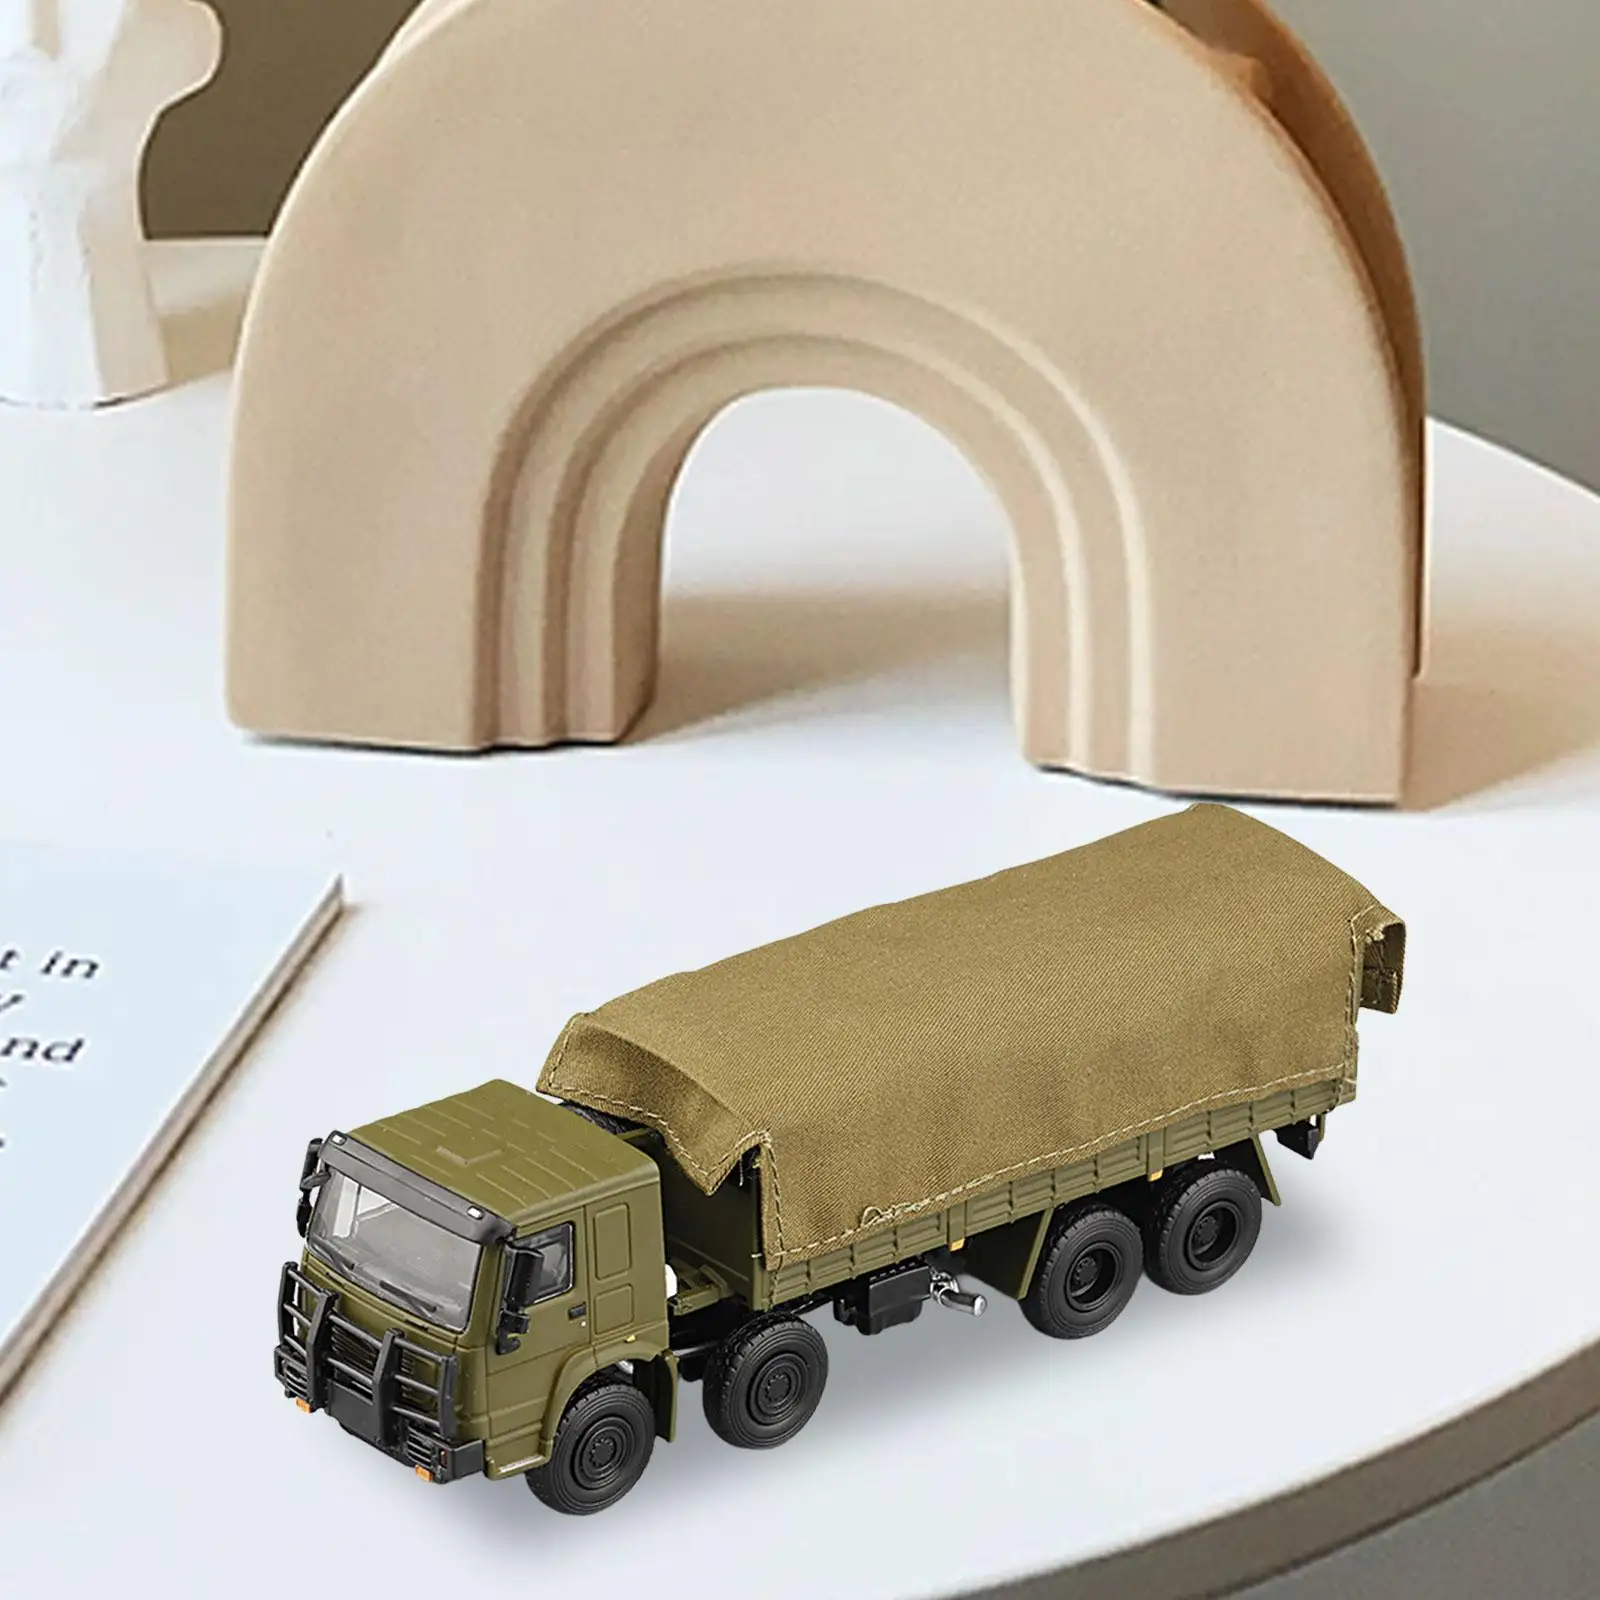 1/64 Diecast Model Car Truck Sand Table Ornament Children Gifts Alloy Car Model for DIY Scene Photography Props Accessories